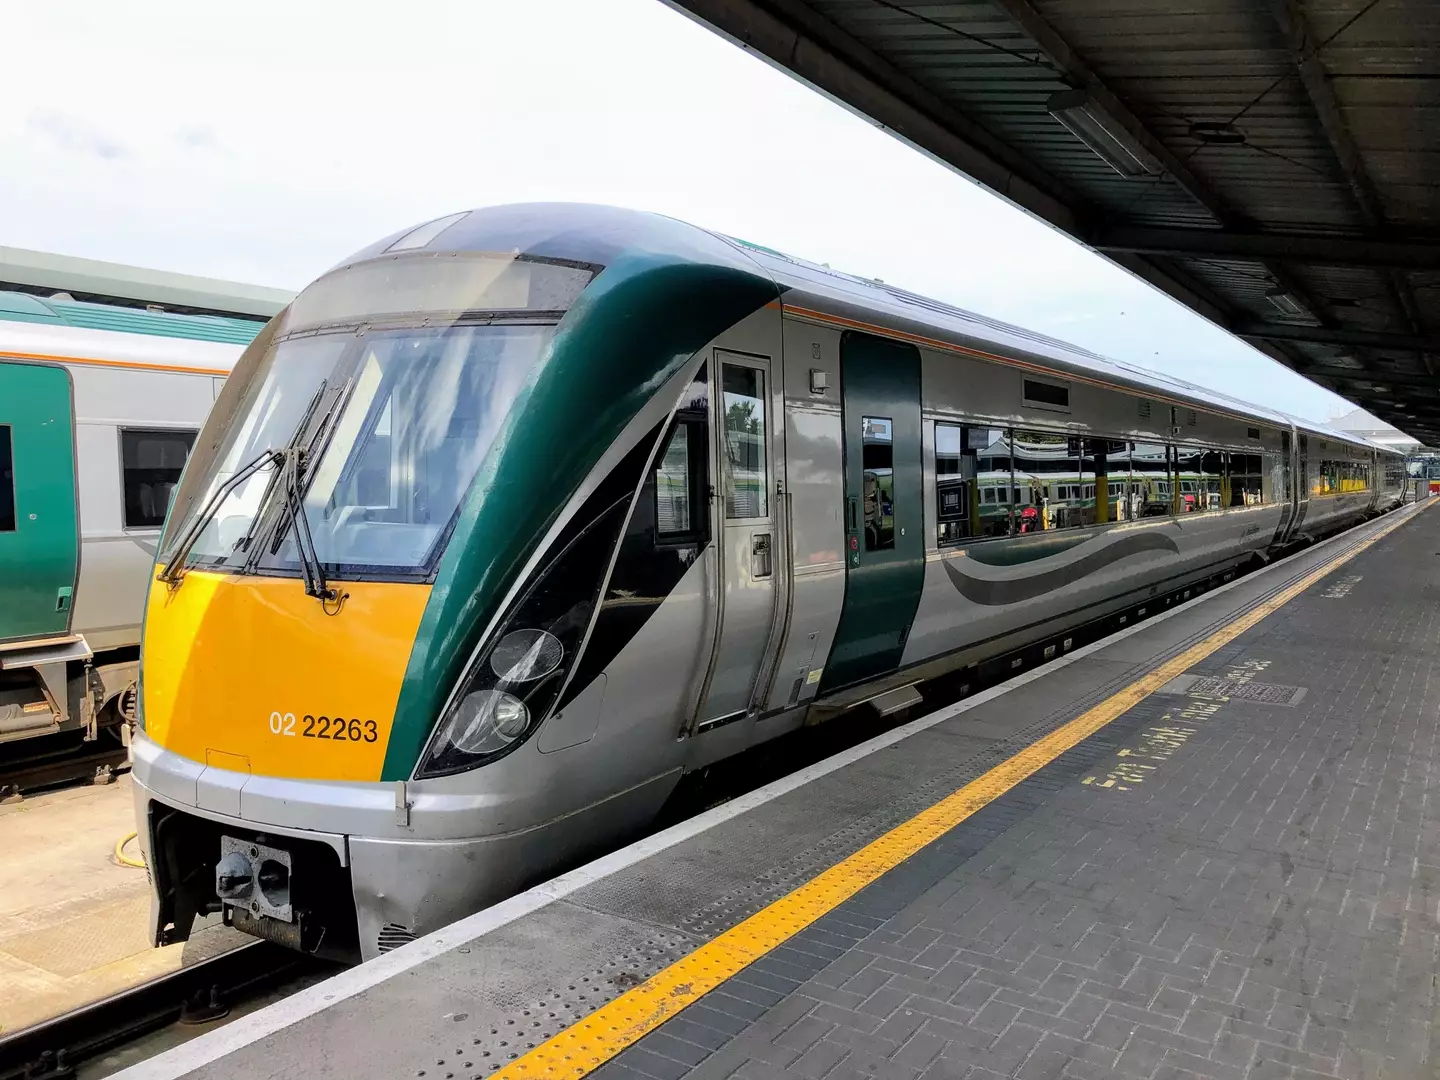 Mills has made a complaint about Irish Rail as he claims his work duties have been 'hacked down to nothing'.